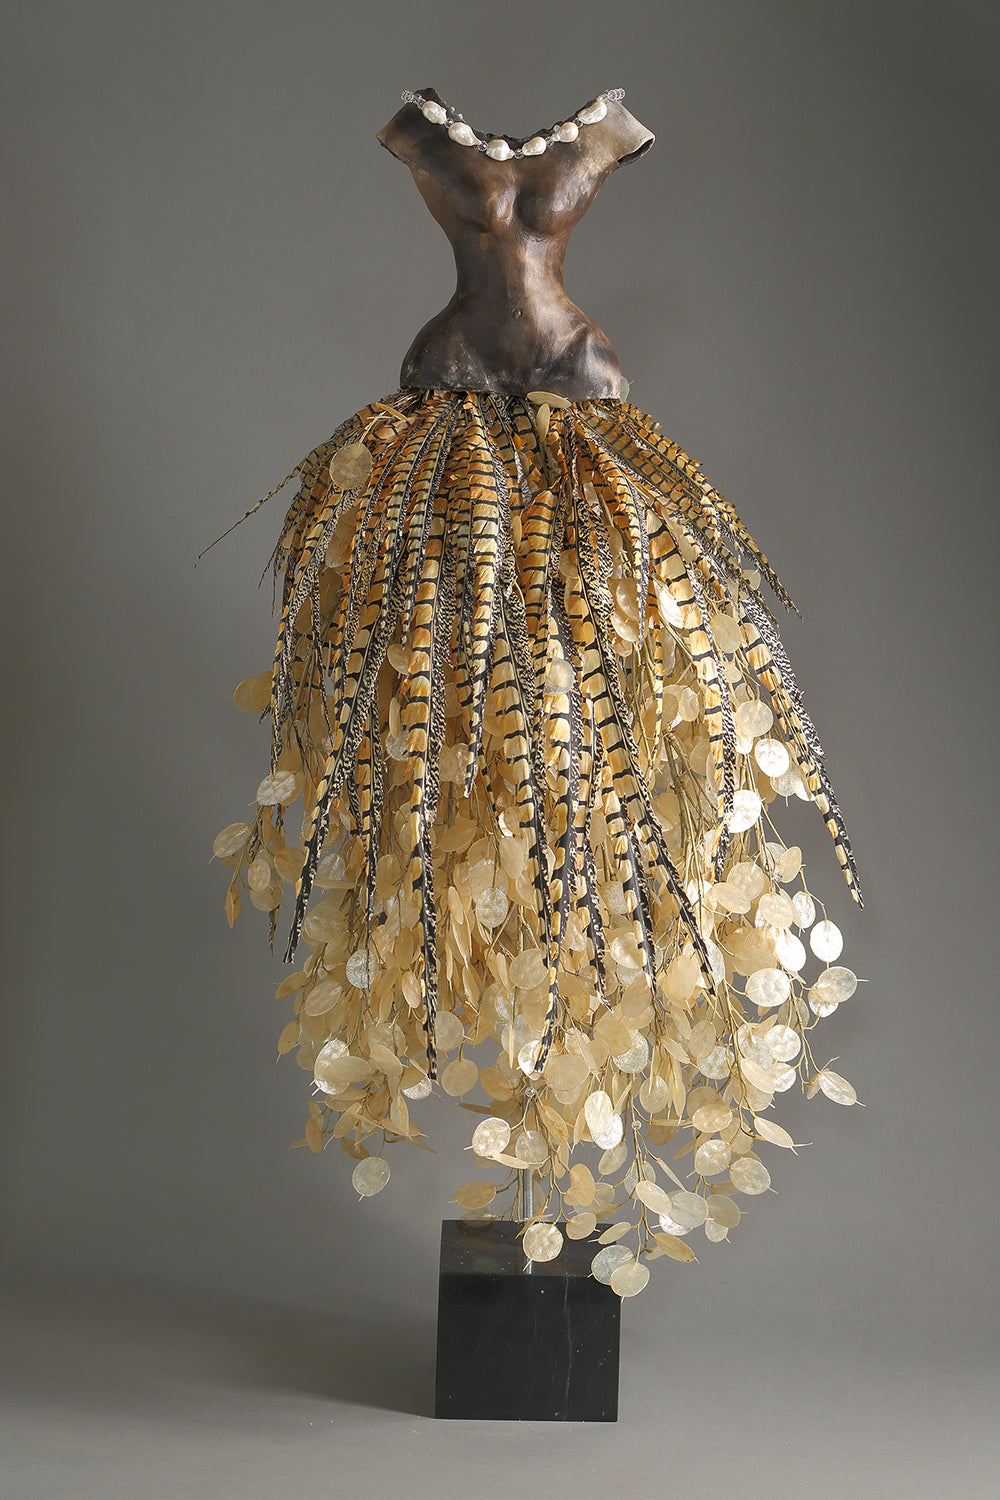 Pearls in Fine Art: Sculpture Bronze Torso with Baroque Pearls, Pheasant Feathers and Silver Dollars, Estella Fransbergen, 2020s